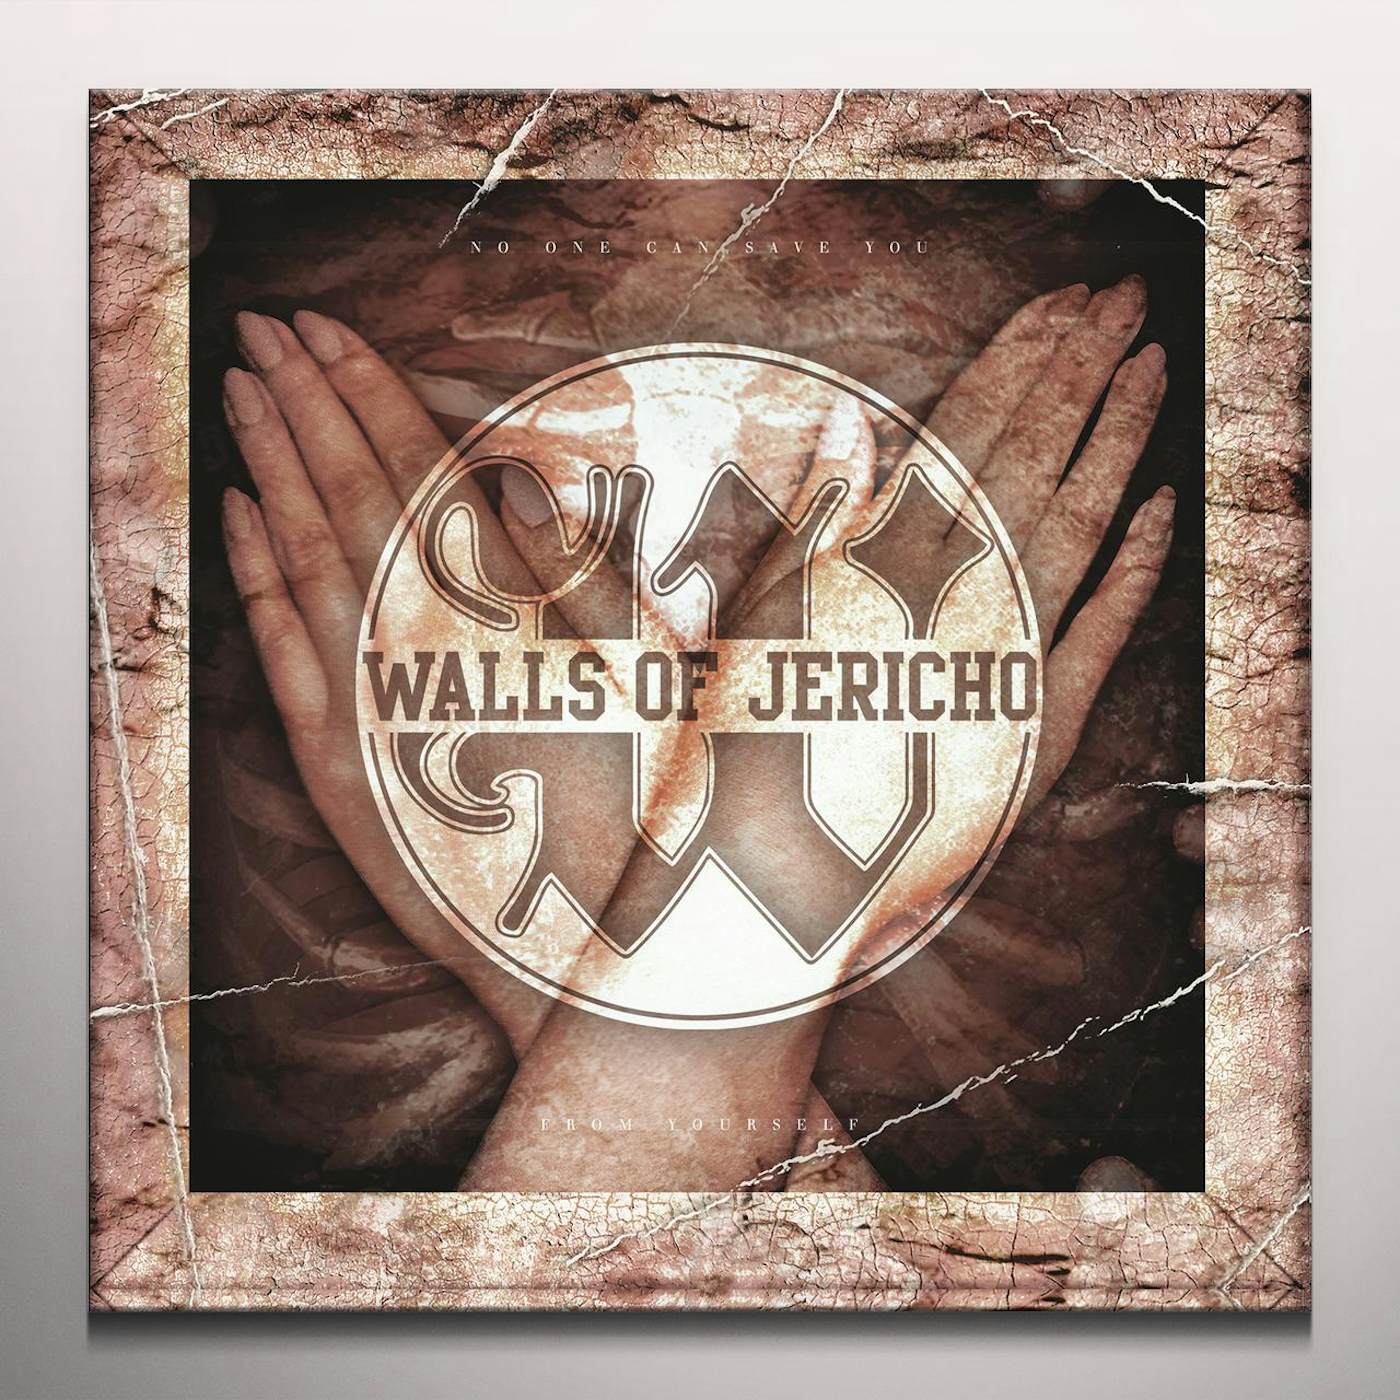 Walls of Jericho No One Can Save You From Yourself Vinyl Record